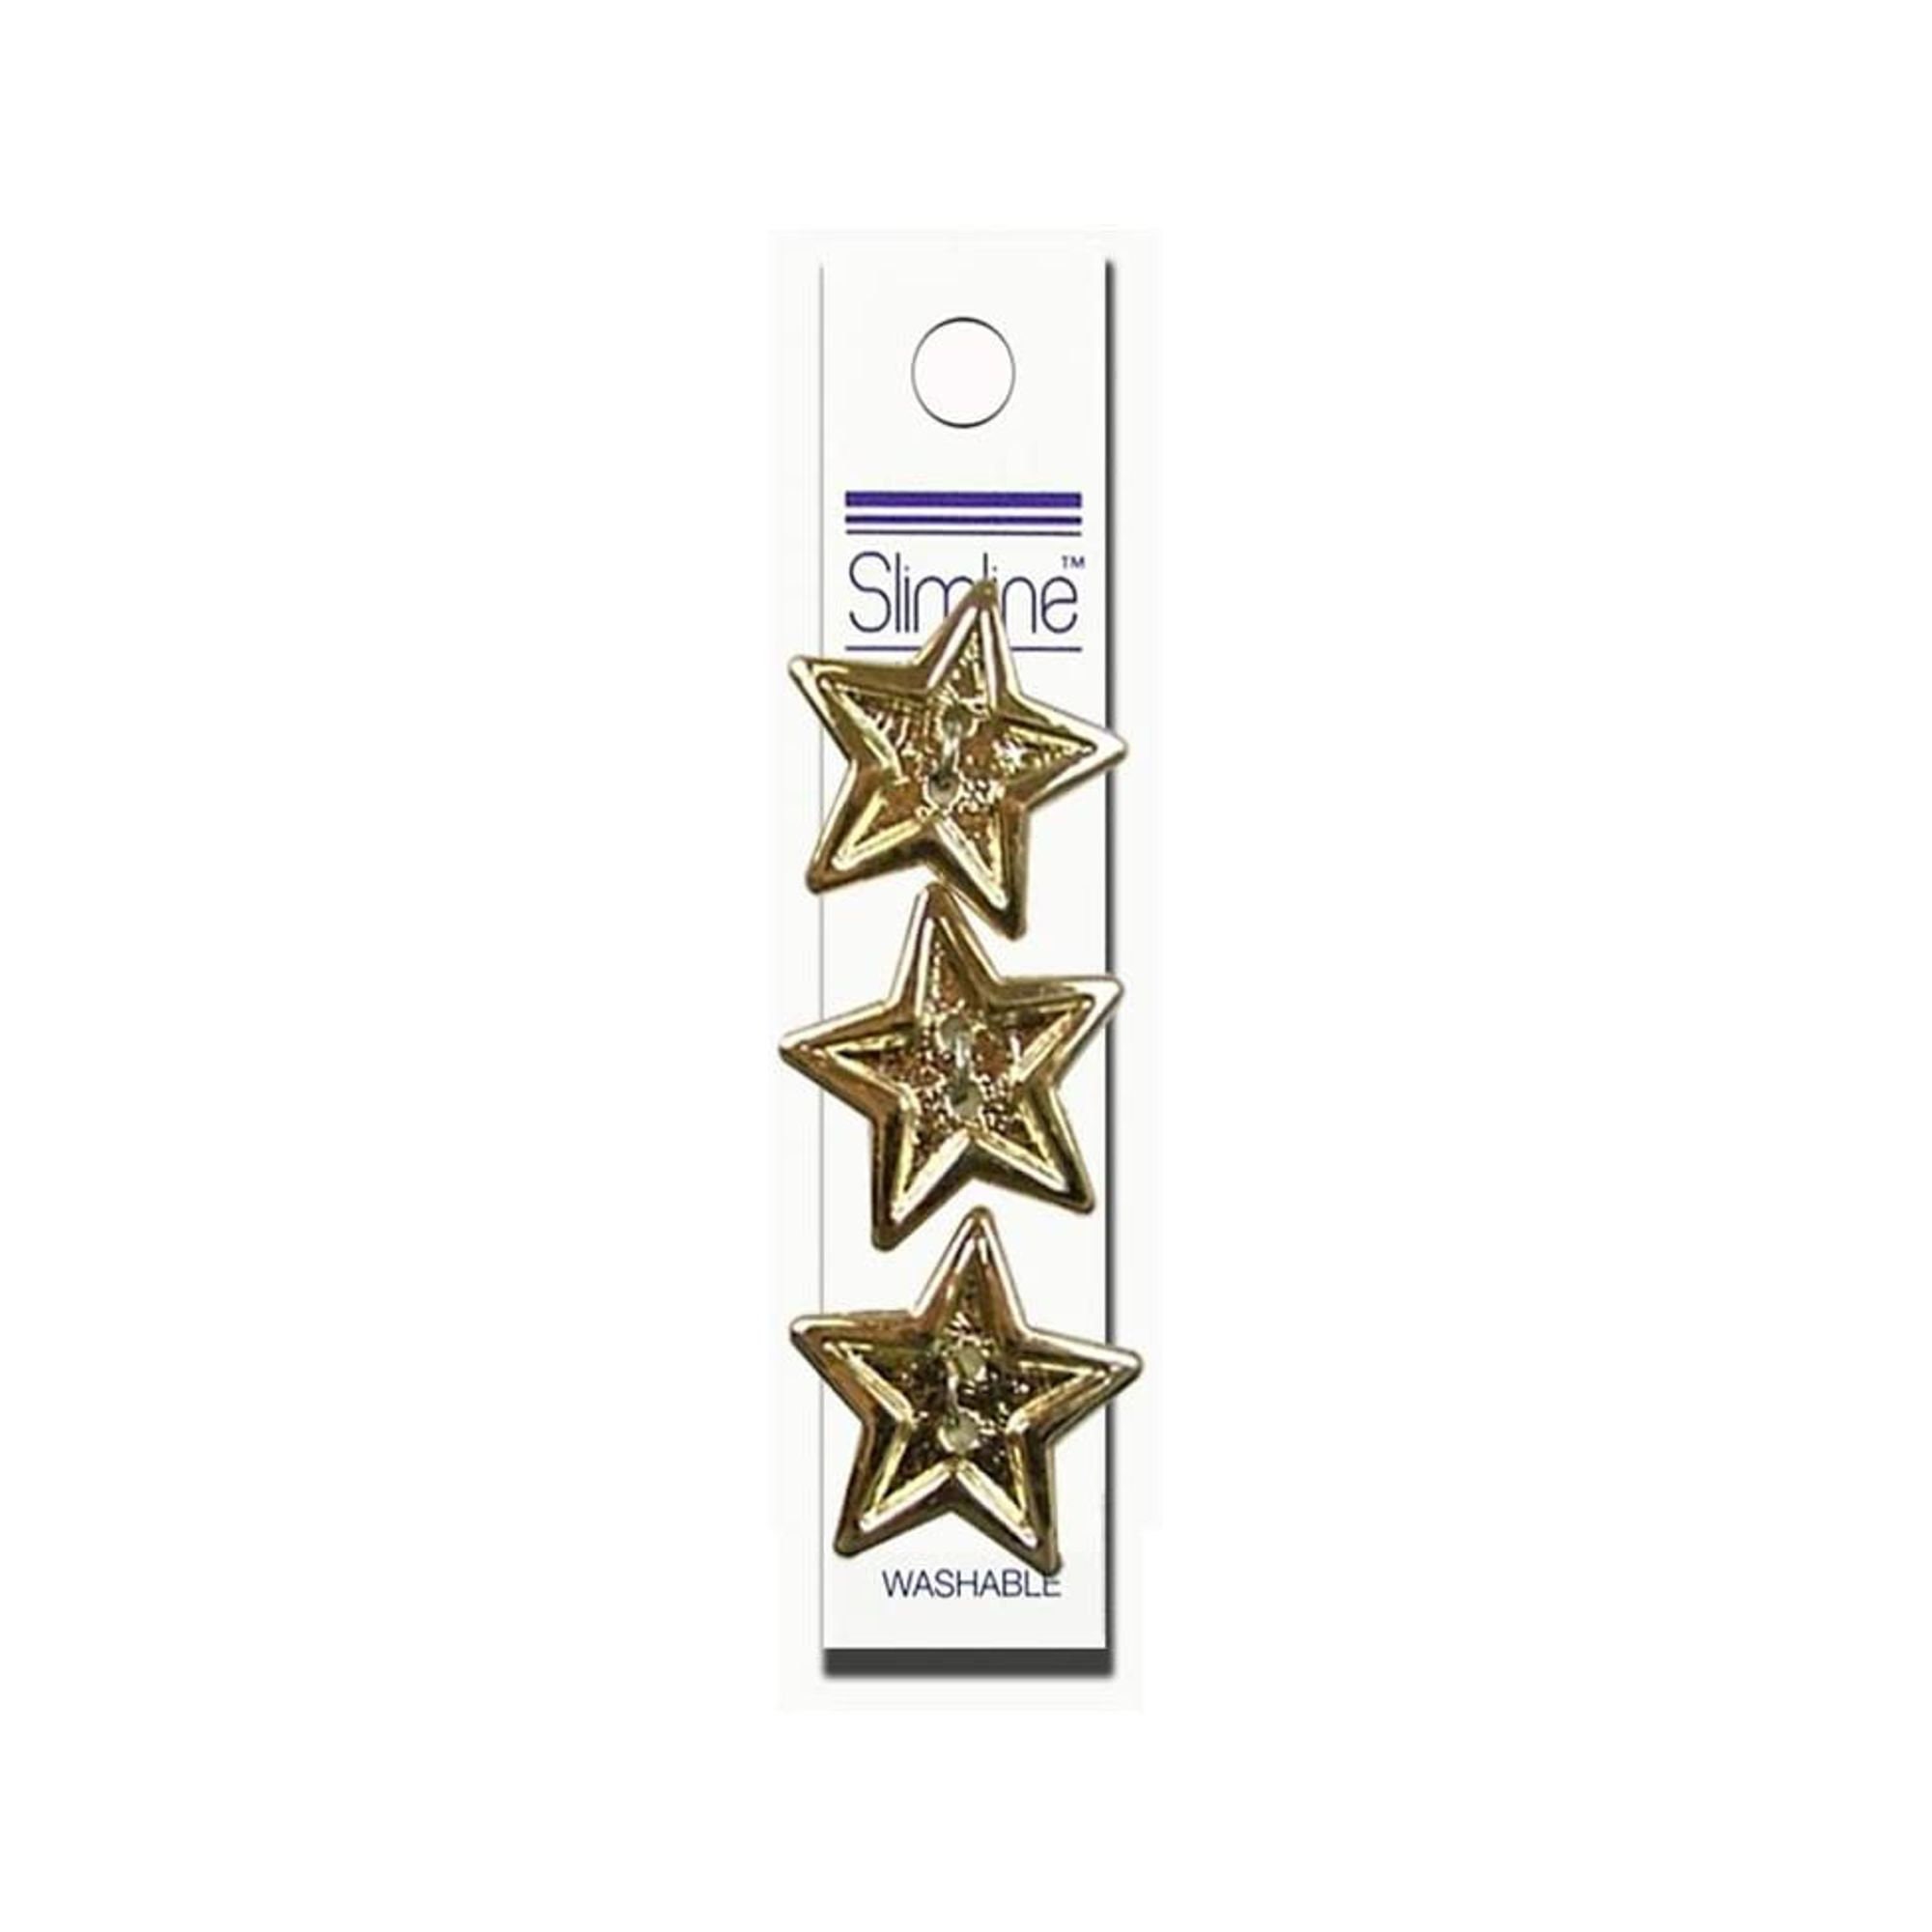 Gold Twinkler Star Buttons – 144 pieces – Shelly's Buttons And More Online  Store